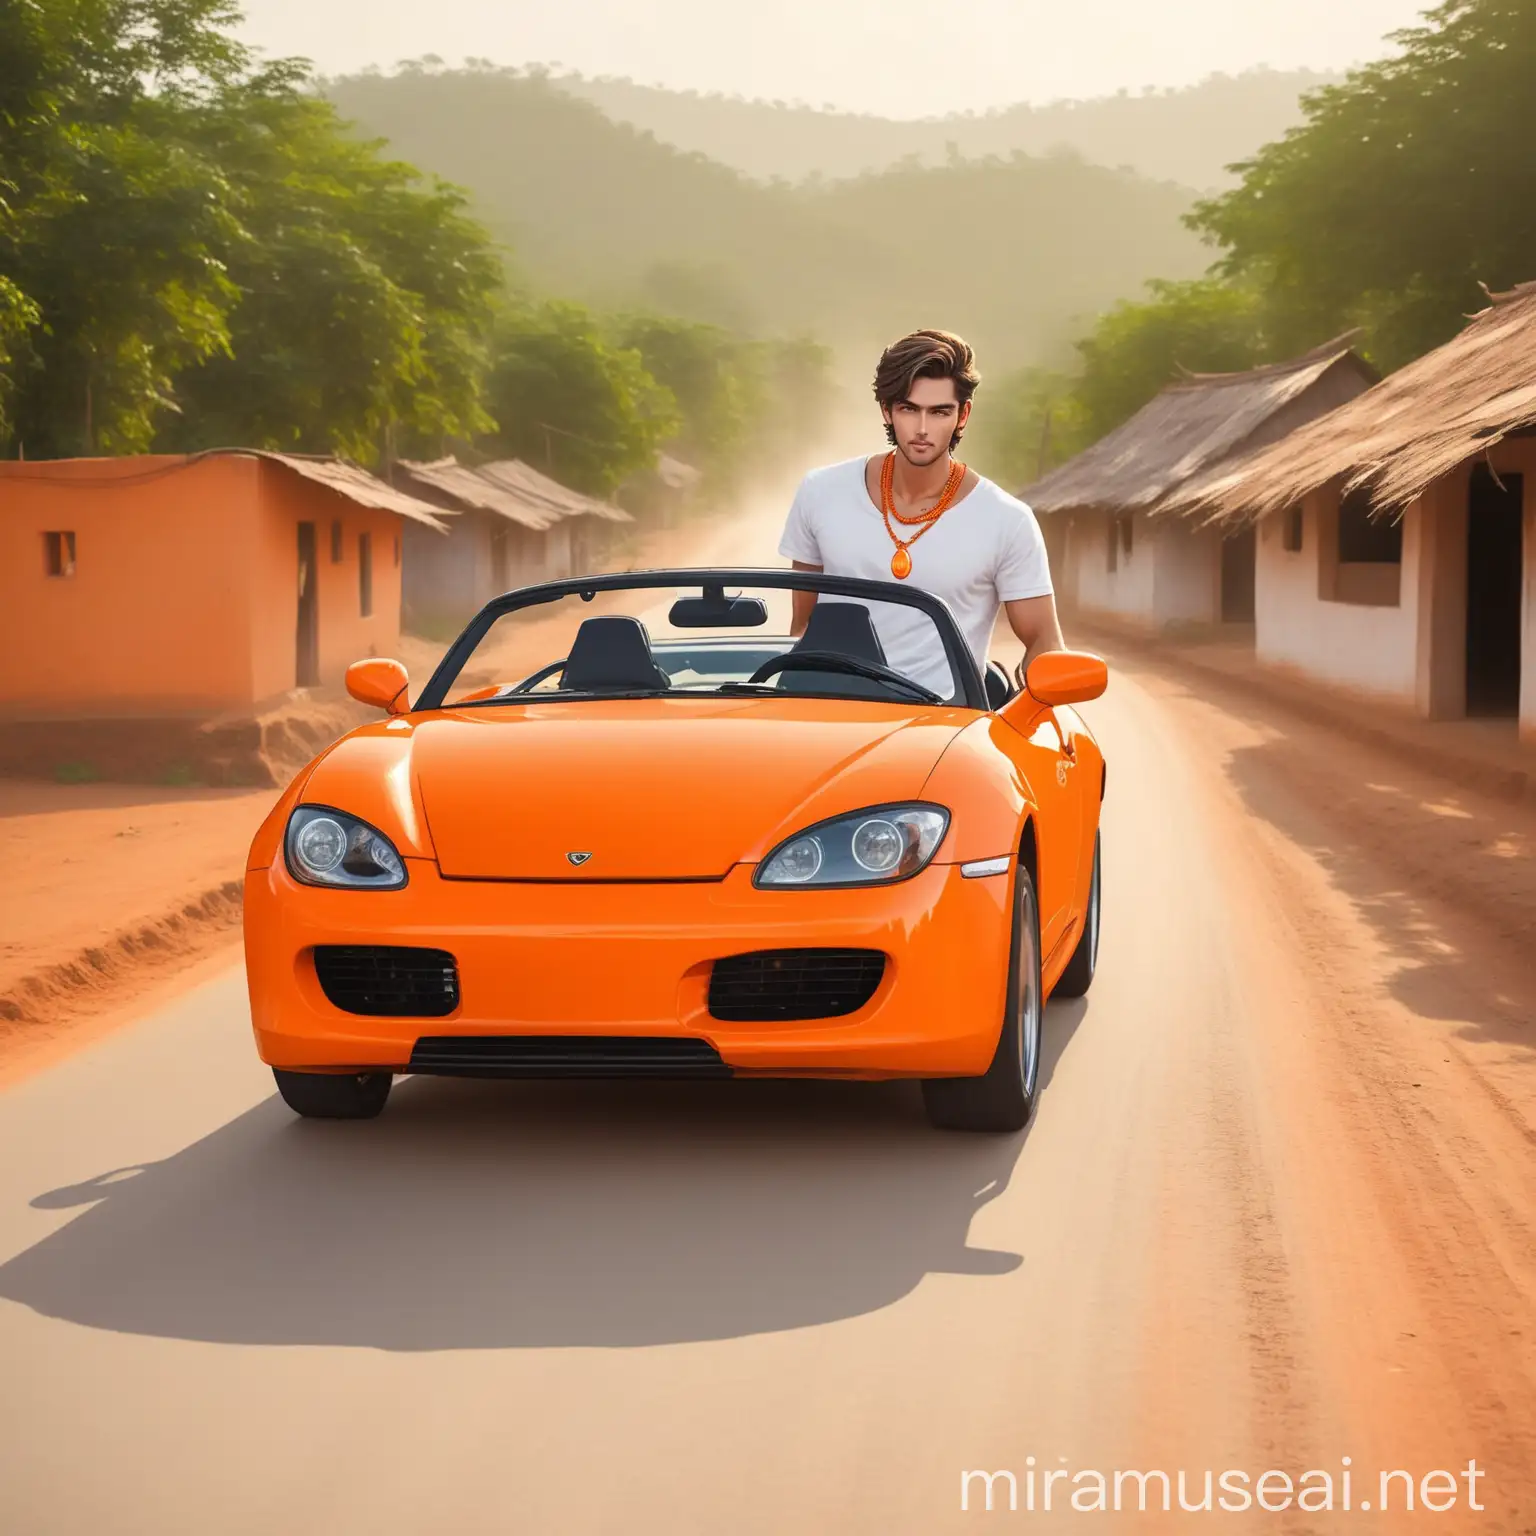 The handsome man in his 20s is Western and is wearing a white t-shirt and black pants.
And, this handsome guy is wearing a necklace that looks like an orange magic potion and is driving an orange sports car.
The background is the road of an Indian village.